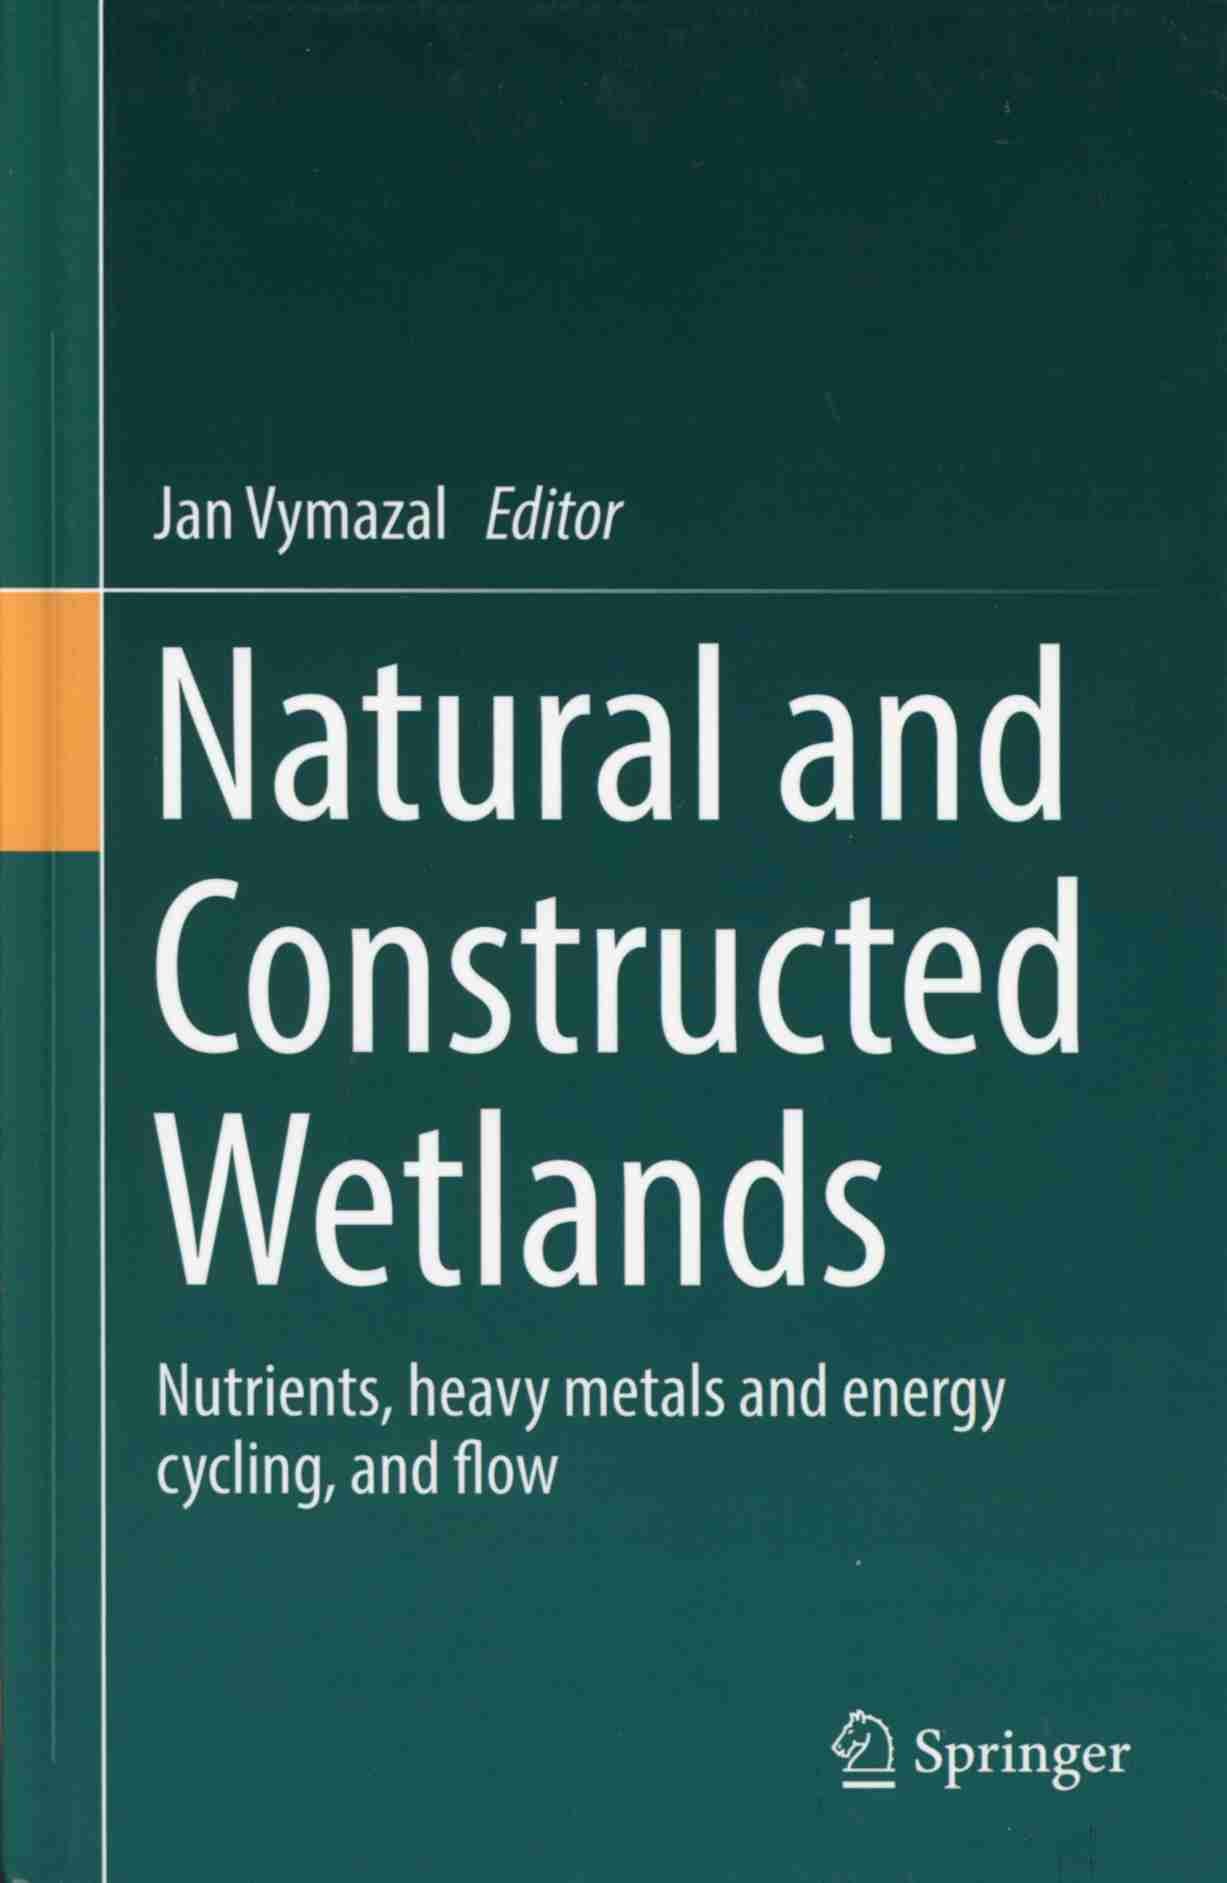 Natural and Constructed Wetlands, 333